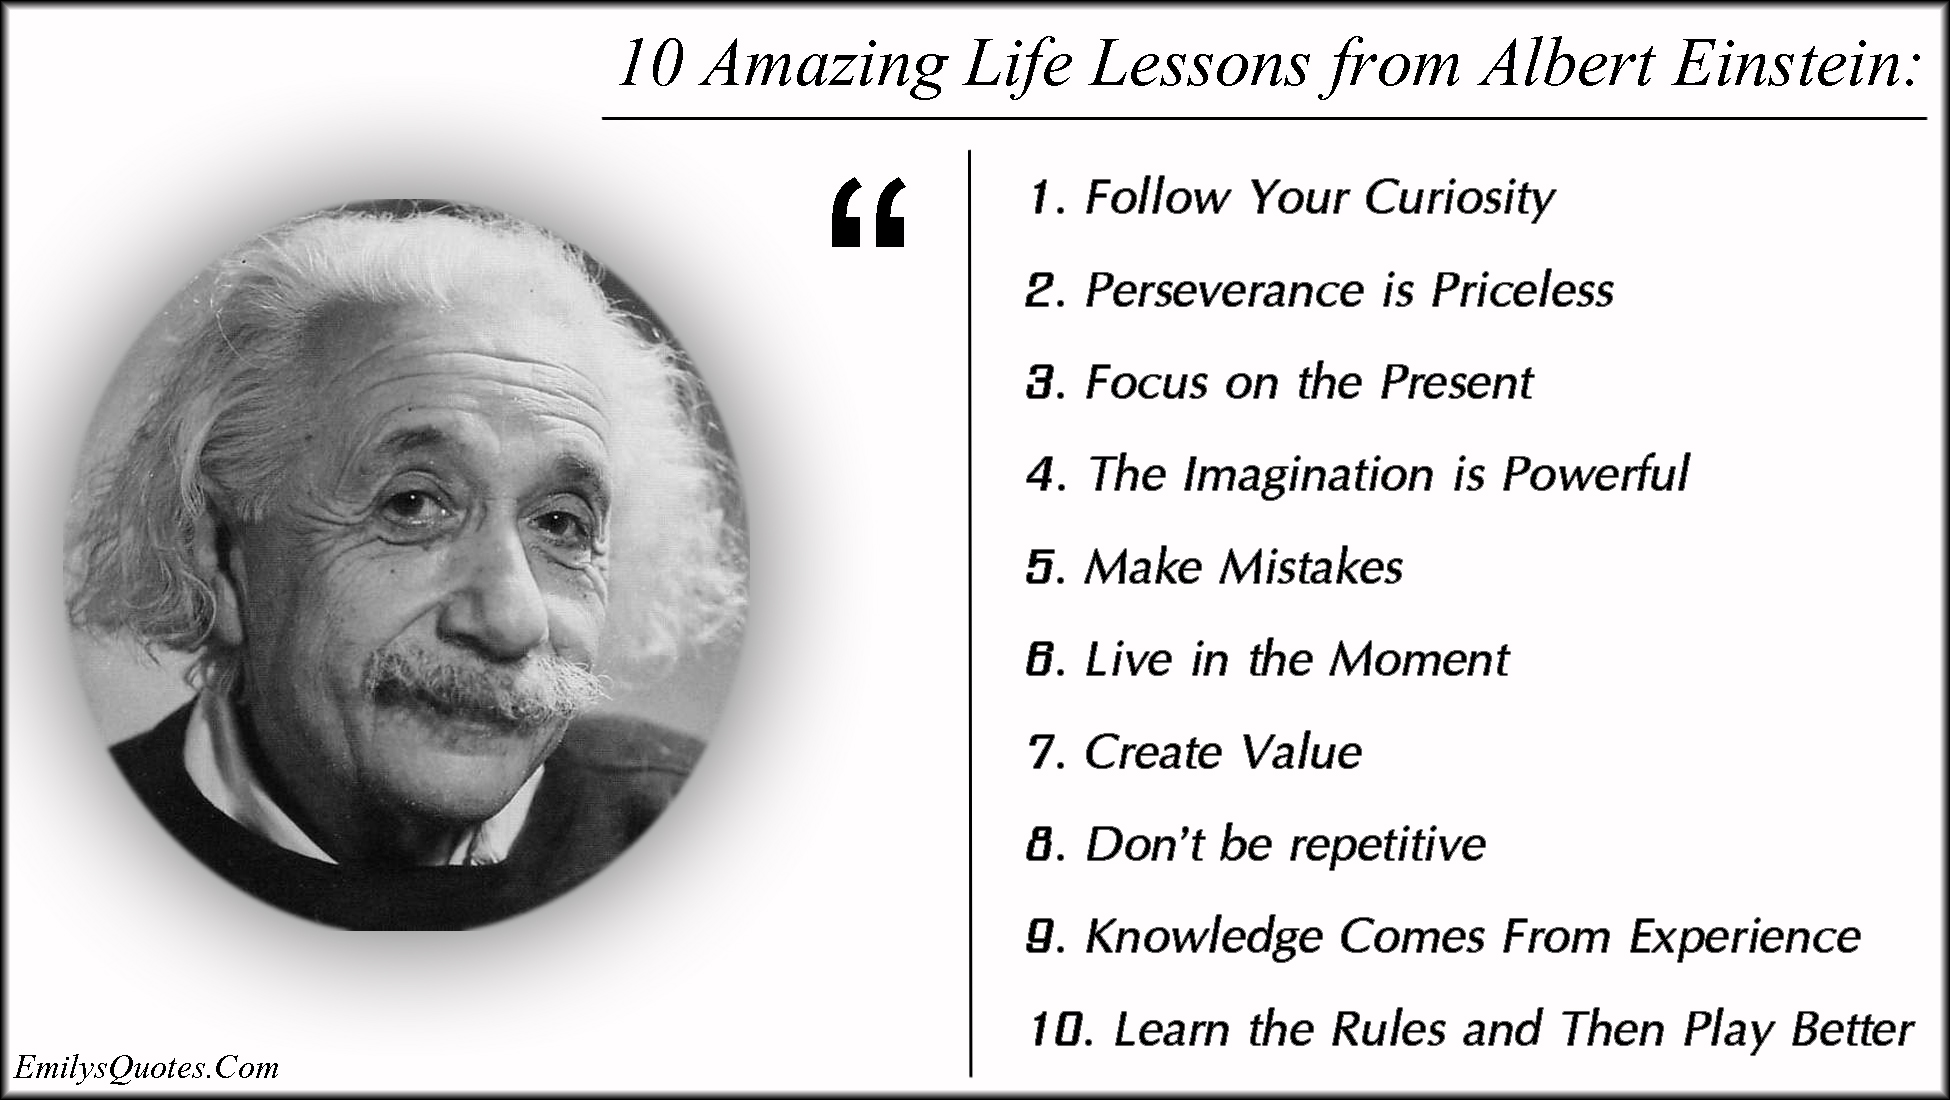 10 Amazing Life Lessons from Albert Einstein: 1. Follow Your Curiosity 2. Perseverance is Priceless 3. Focus on the Present 4. The Imagination is Powerful 5. Make Mistakes 6. Live in the Moment 7. Create Value 8. Don’t be repetitive 9. Knowledge Comes From Experience 10. Learn the Rules and Then Play Better